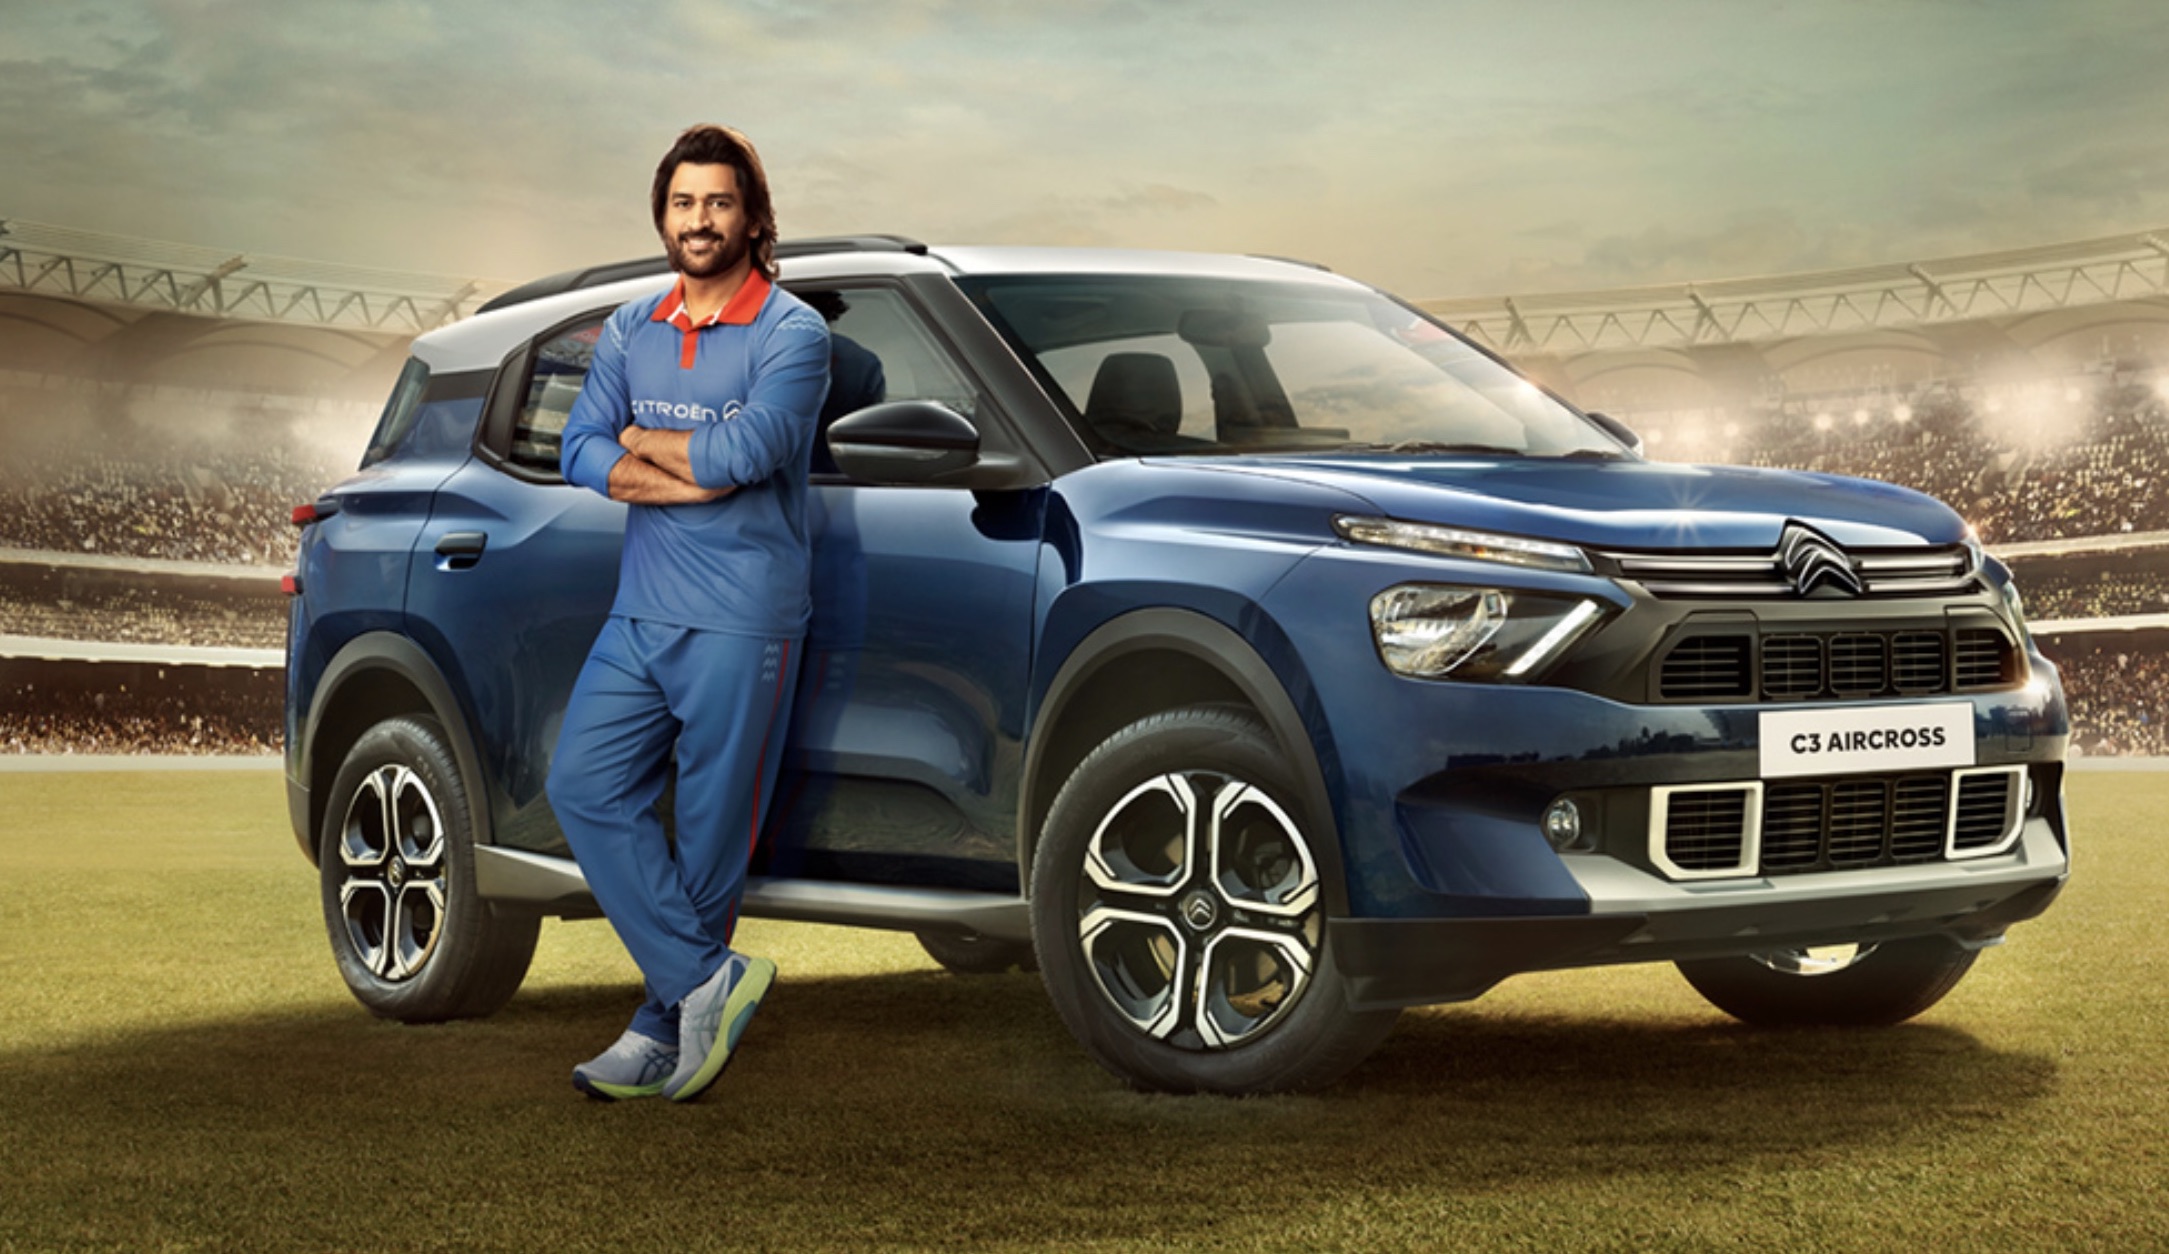 Citroen C3 Aircross Dhoni Edition Launched